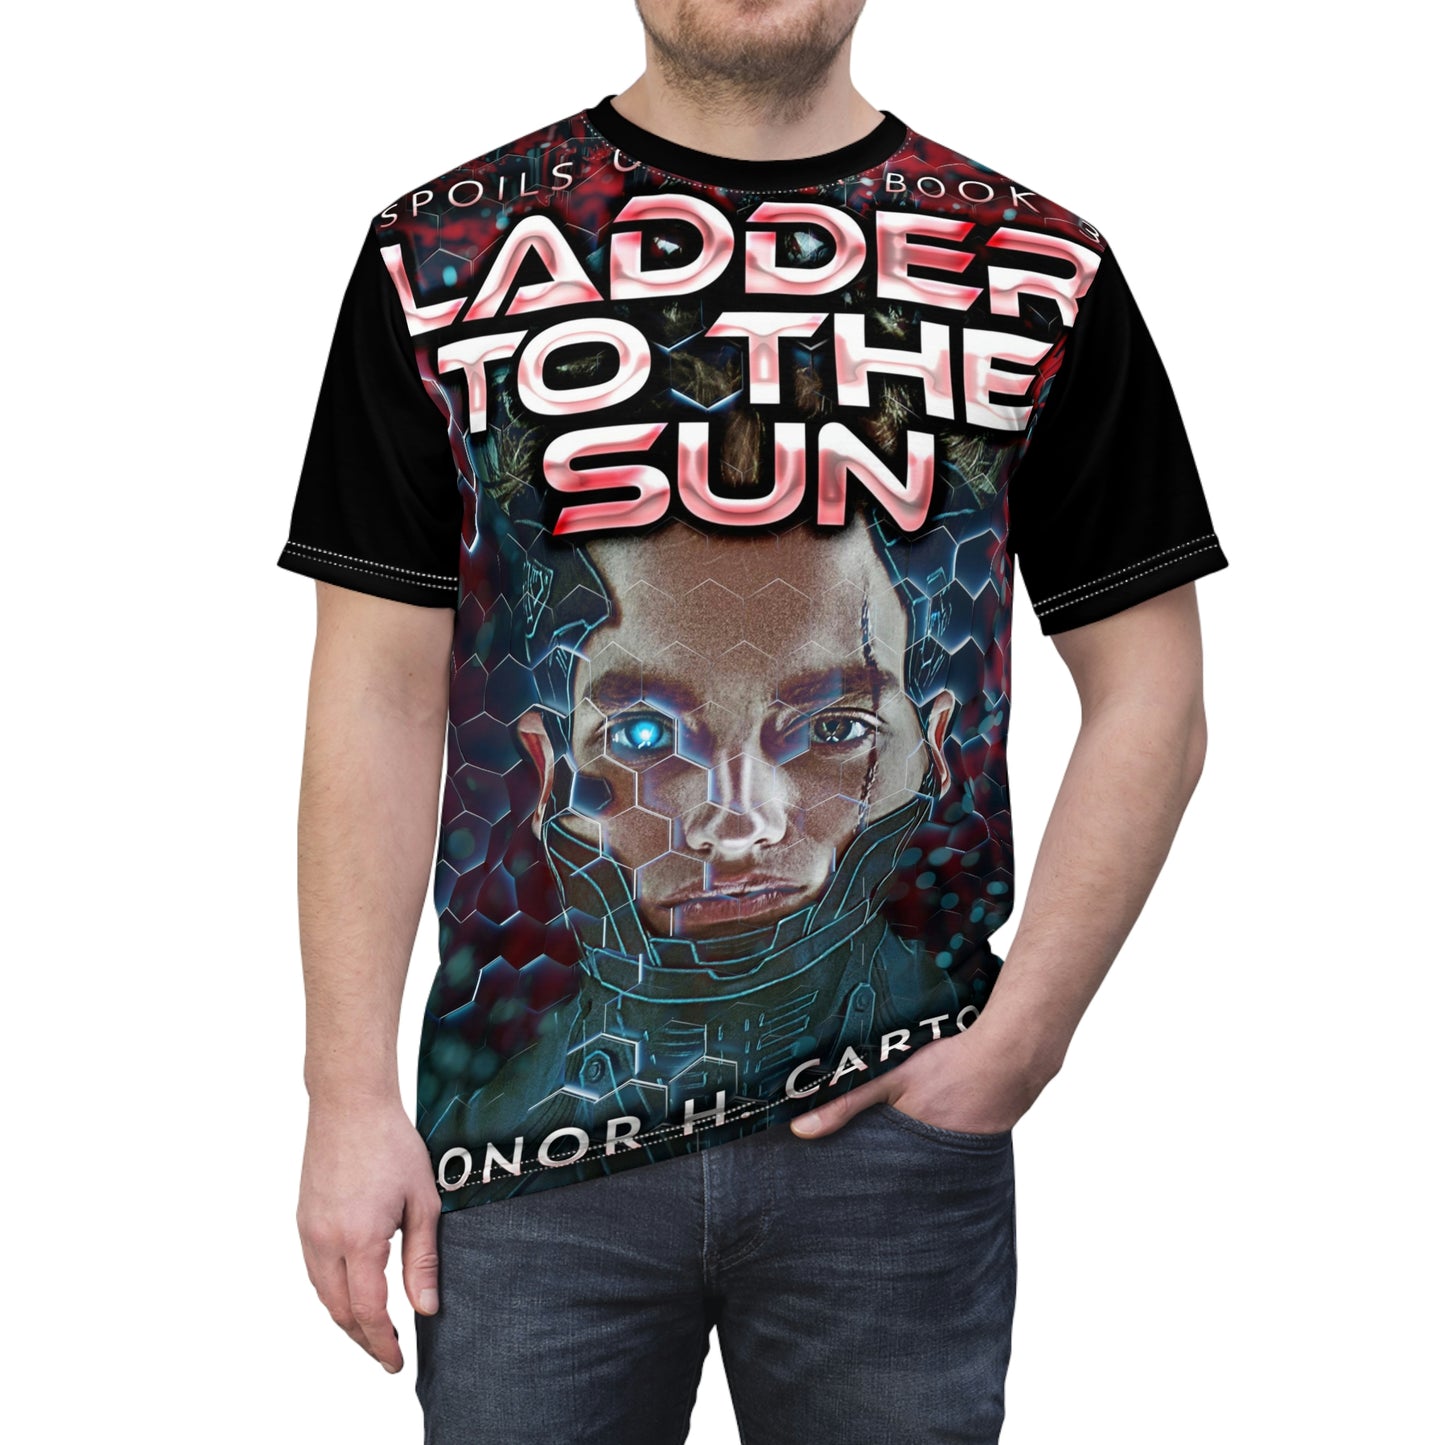 Ladder To The Sun - Unisex All-Over Print Cut & Sew T-Shirt